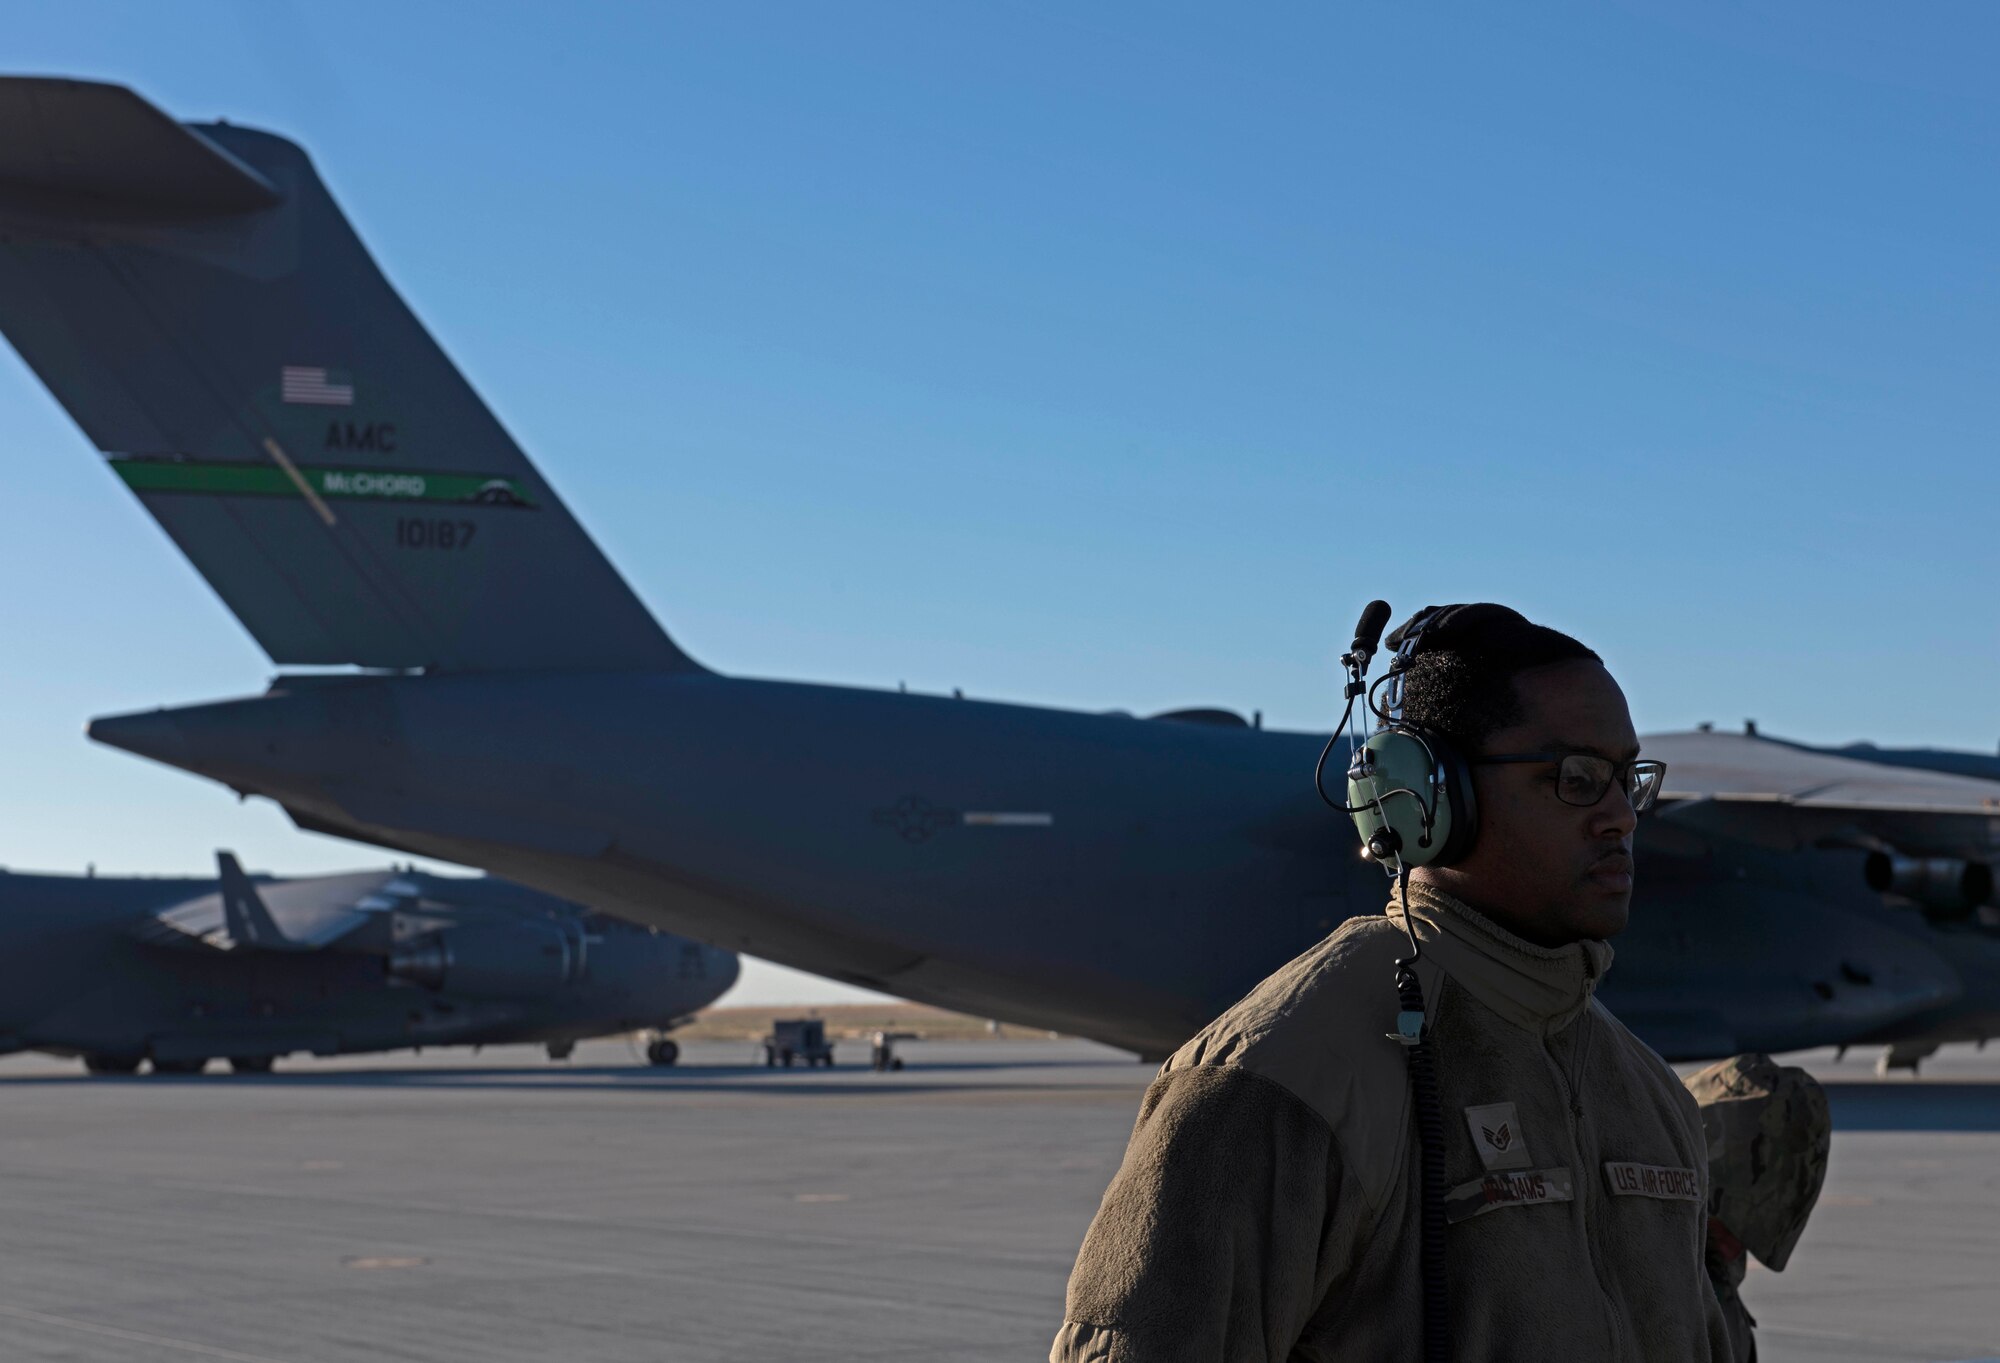 U.S. Air Force Staff Sgt. Nicholas Williams, avionics technician with the 62d Aircraft Maintenance Squadron, participates in Exercise Rainier War 22B at Mountain Home Air Force Base, Idaho, Oct. 17, 2022. Airmen from multiple Team McChord units came together to form the 7th Expeditionary Airlift Squadron during Rainier War 22B; which is a full-scale readiness exercise simulating a deployment in support of U.S. Indo-Pacific areas of responsibility. (U.S. Air Force photo by Staff Sgt. Zoe Thacker)